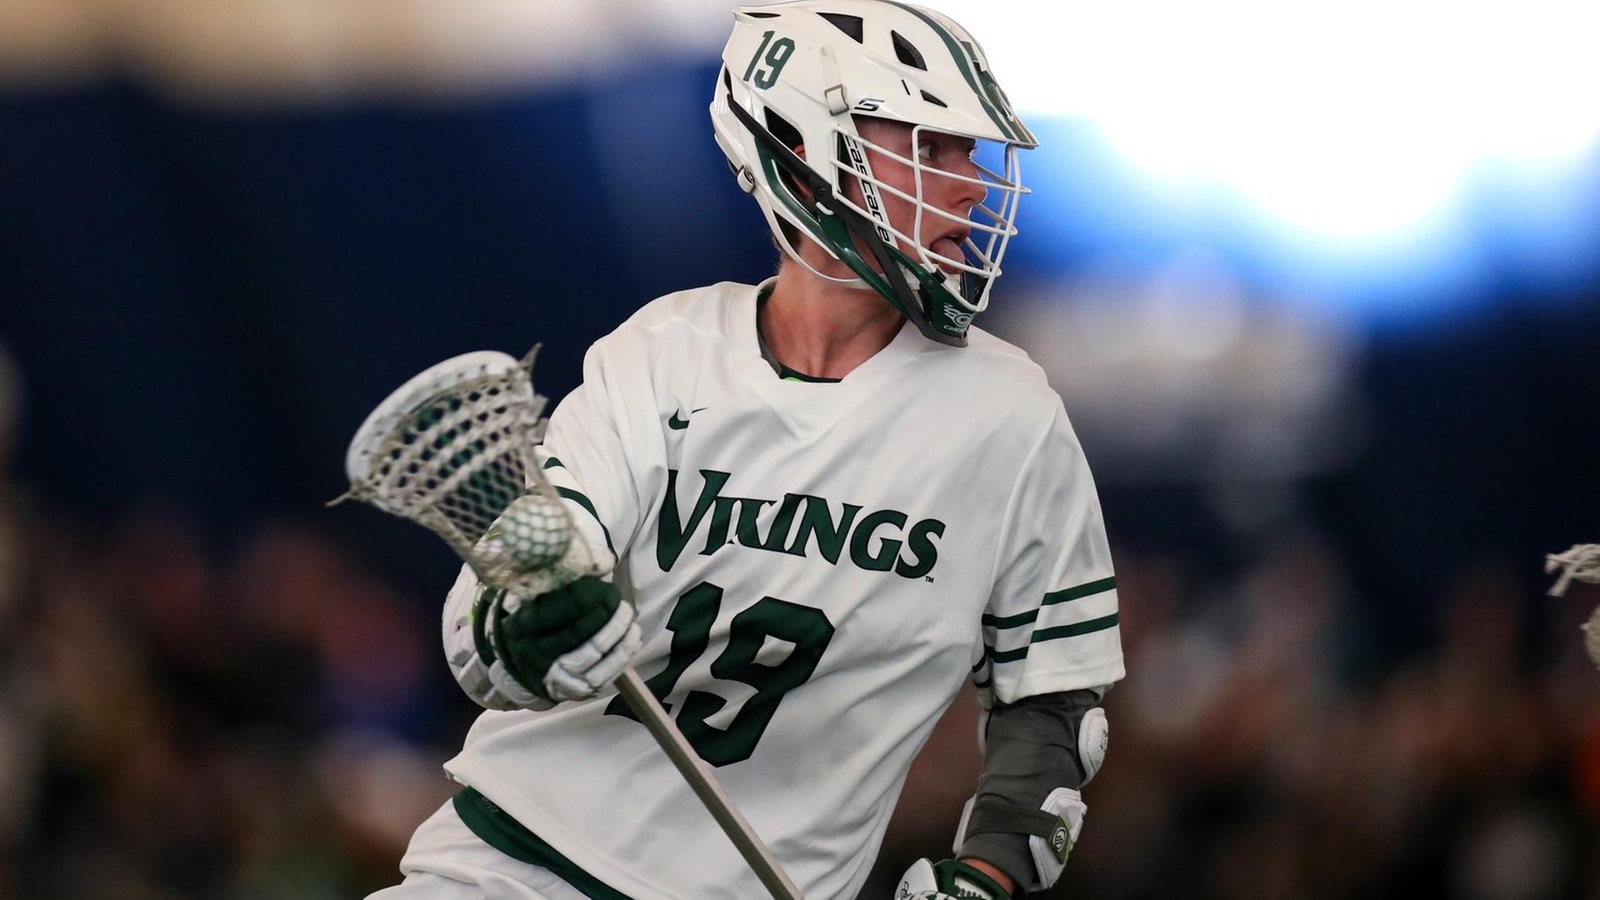 Hanna Named to USILA Team of the Week